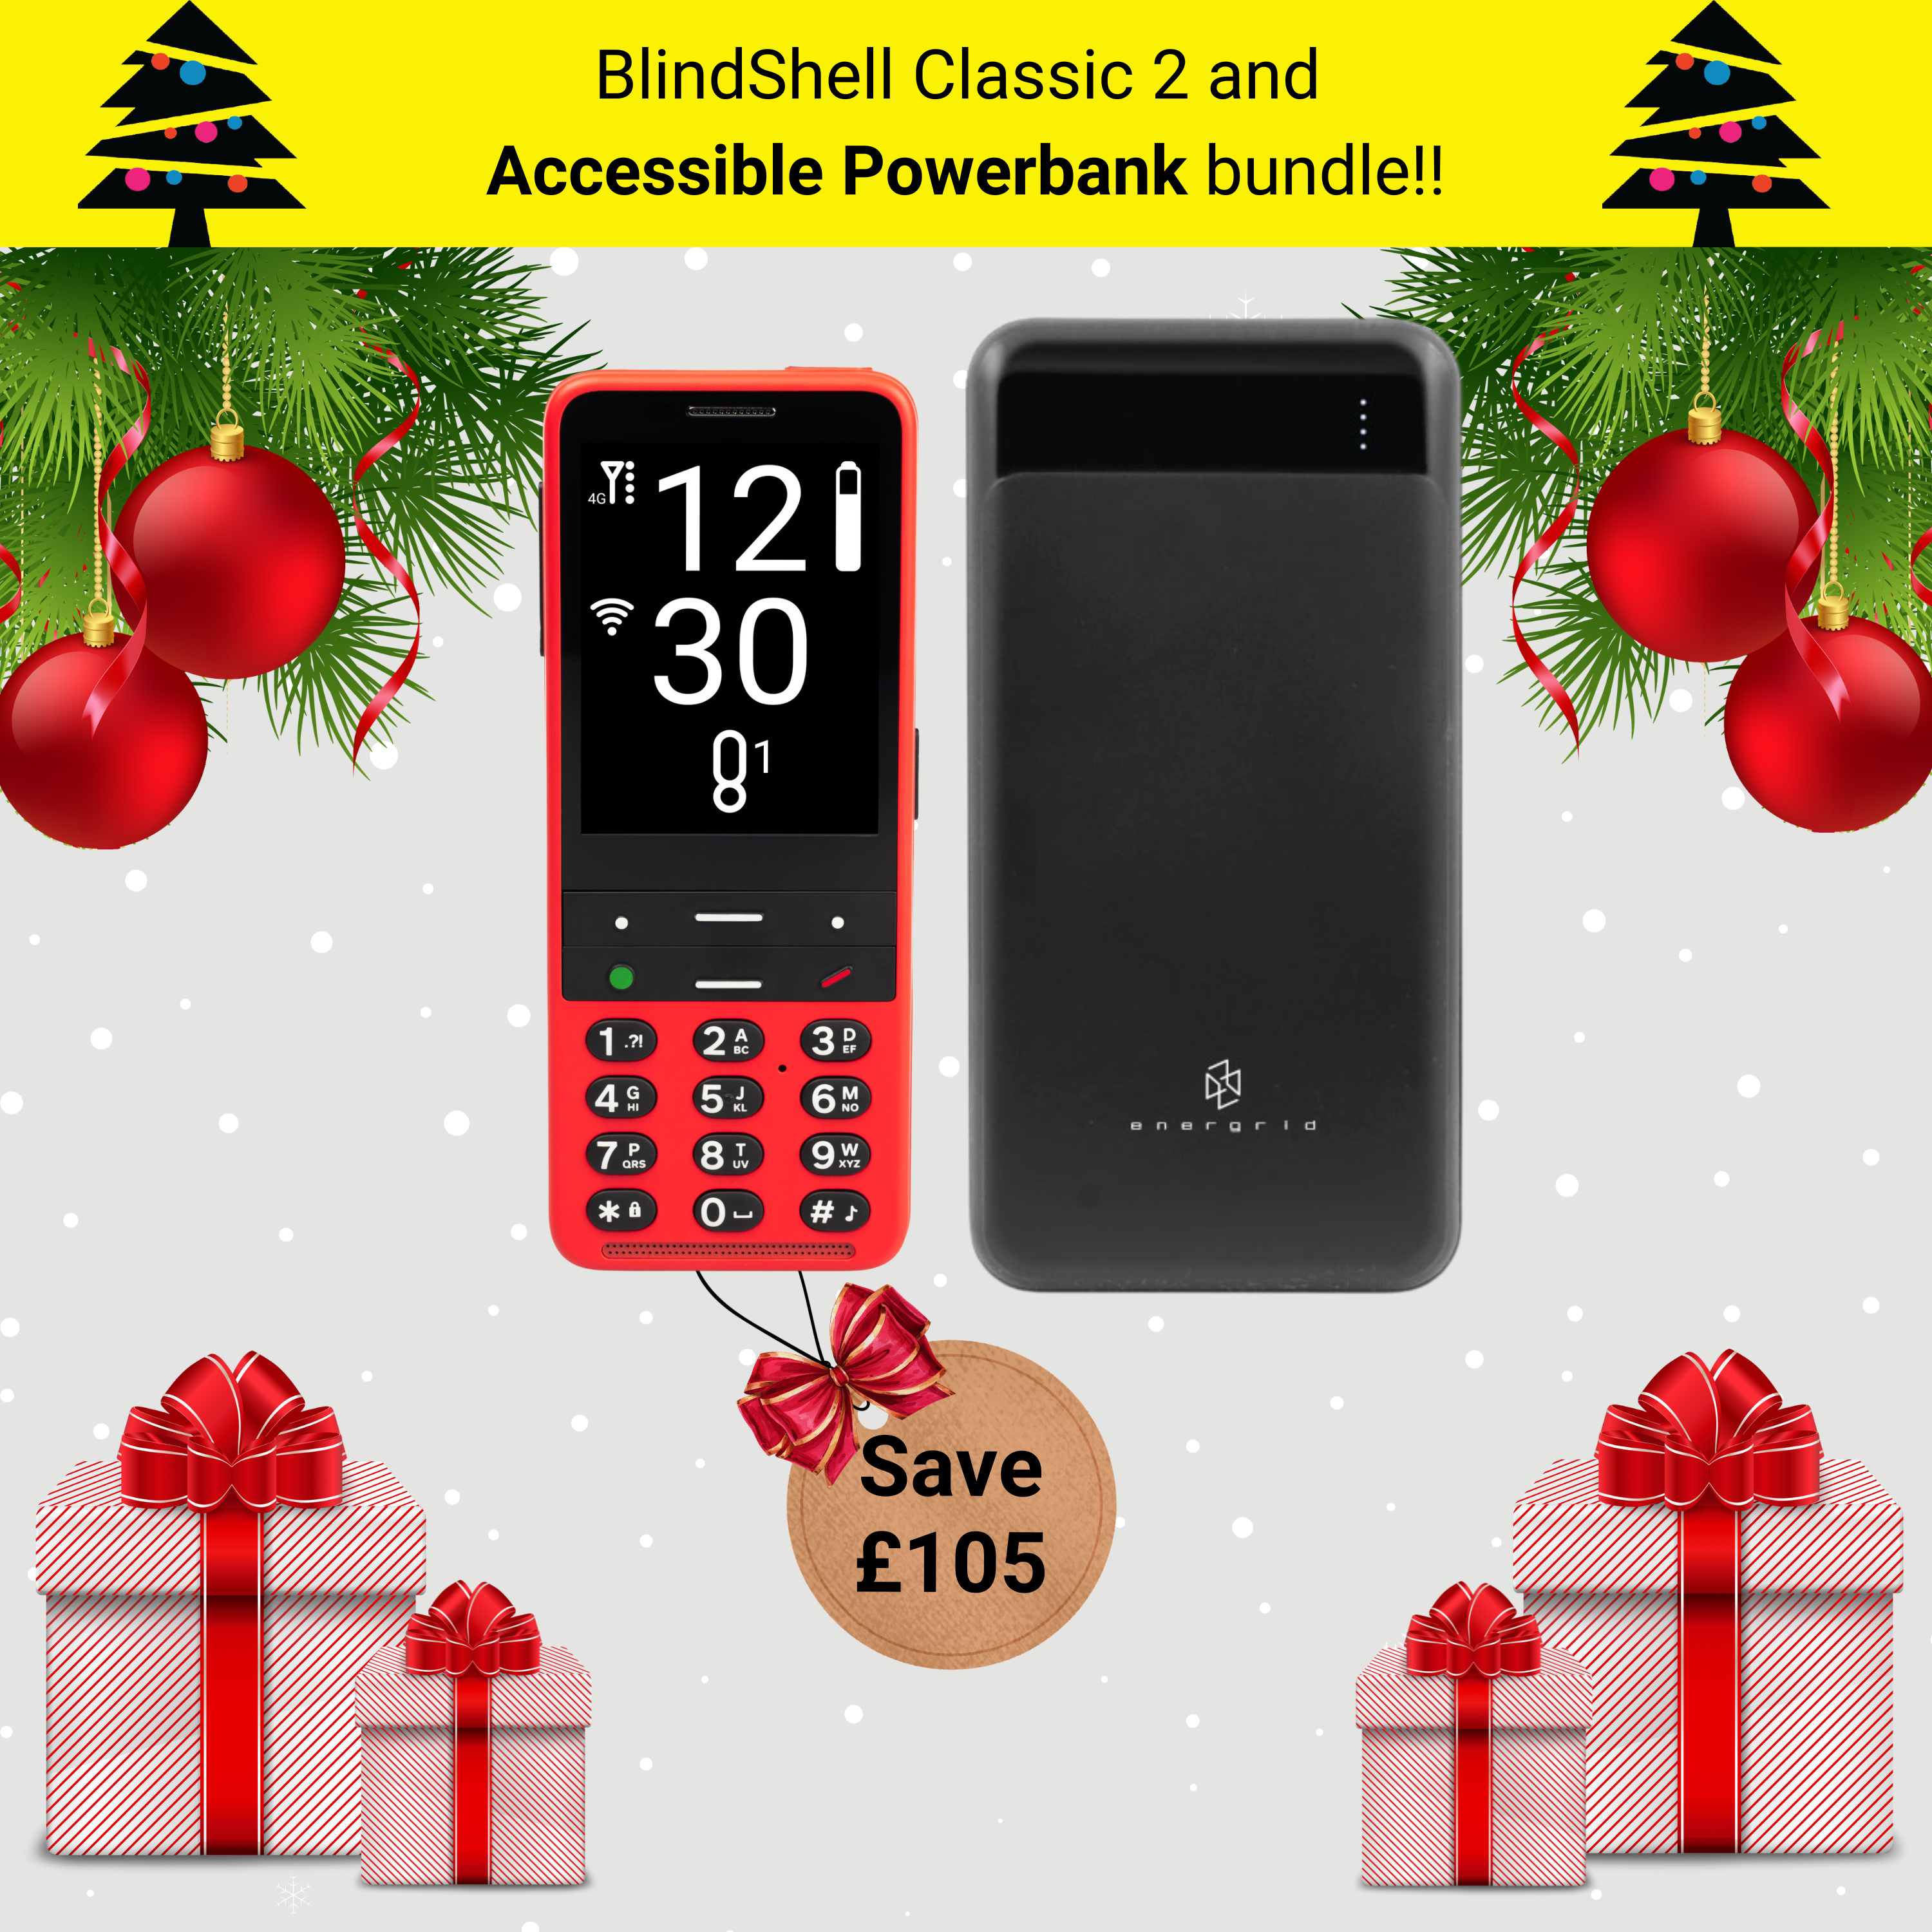 BlindShell Classic 2 and Accessible Powerbank bundle!!  Save £105